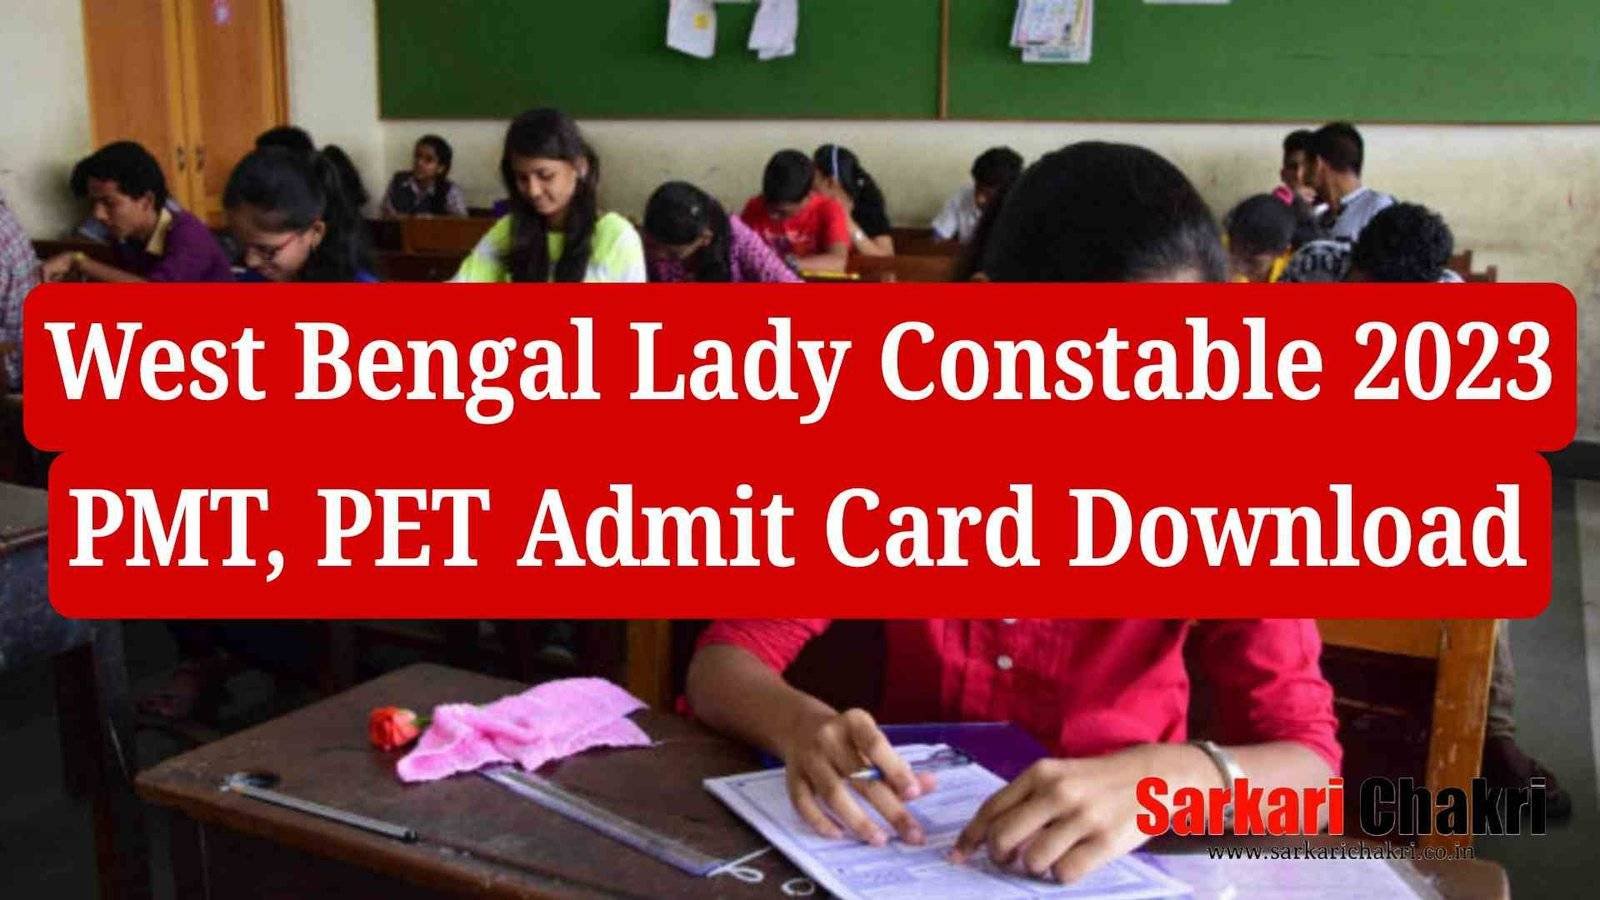 WBP Lady Constable 2023 Admit Card Download Link